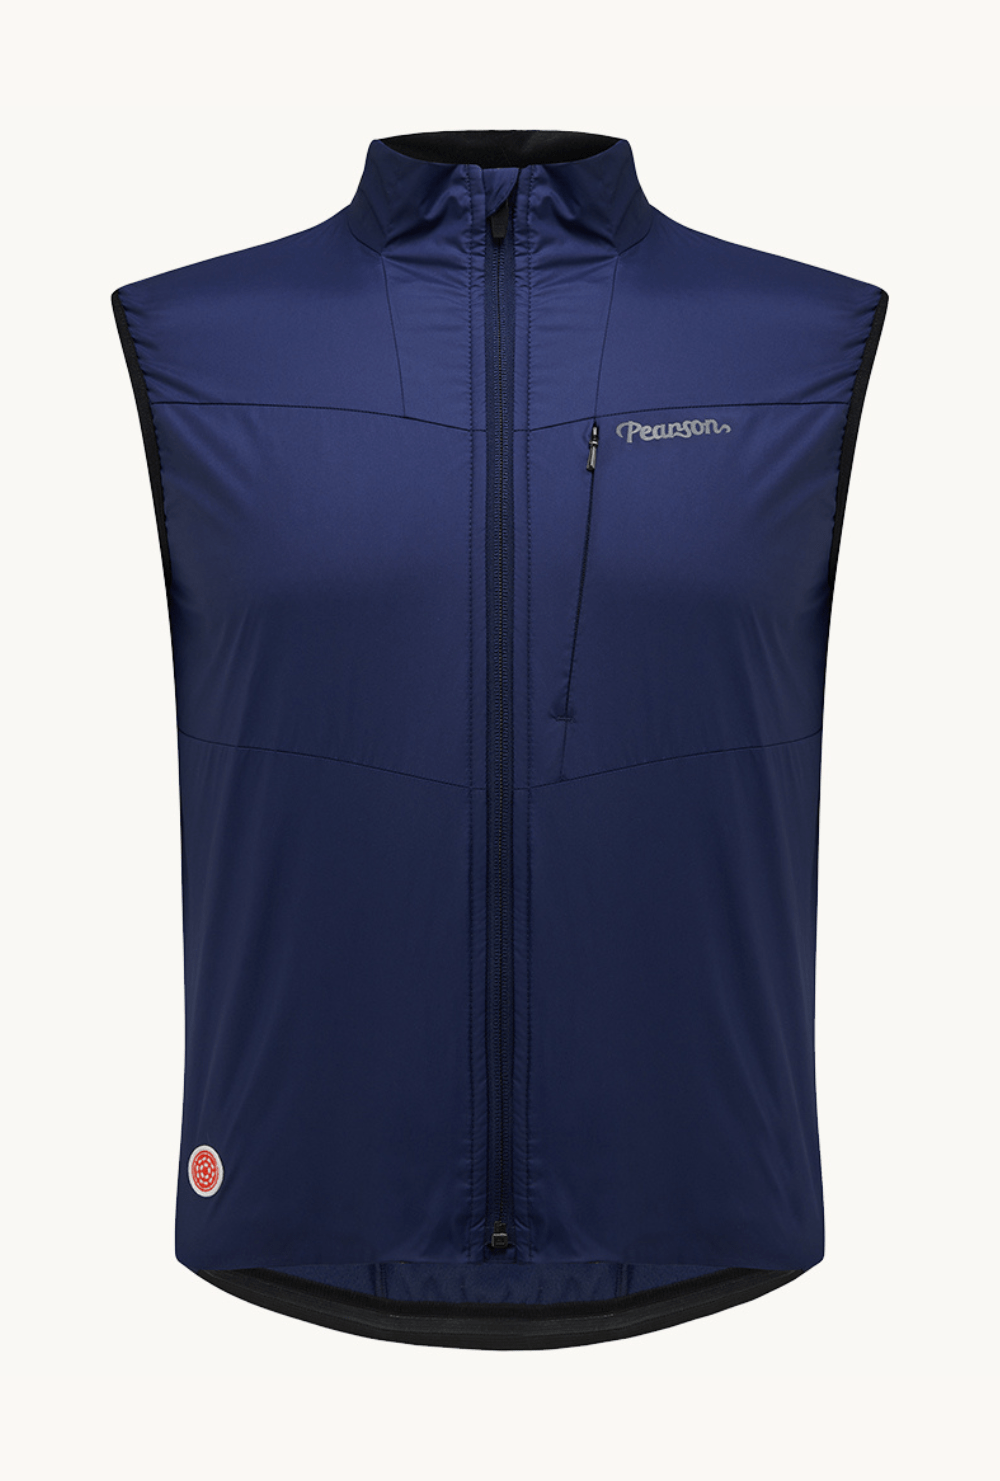 Pearson 1860  Feel The Benefits - Road Insulated Gilet Blue Ink  Xx-large / Blue Ink